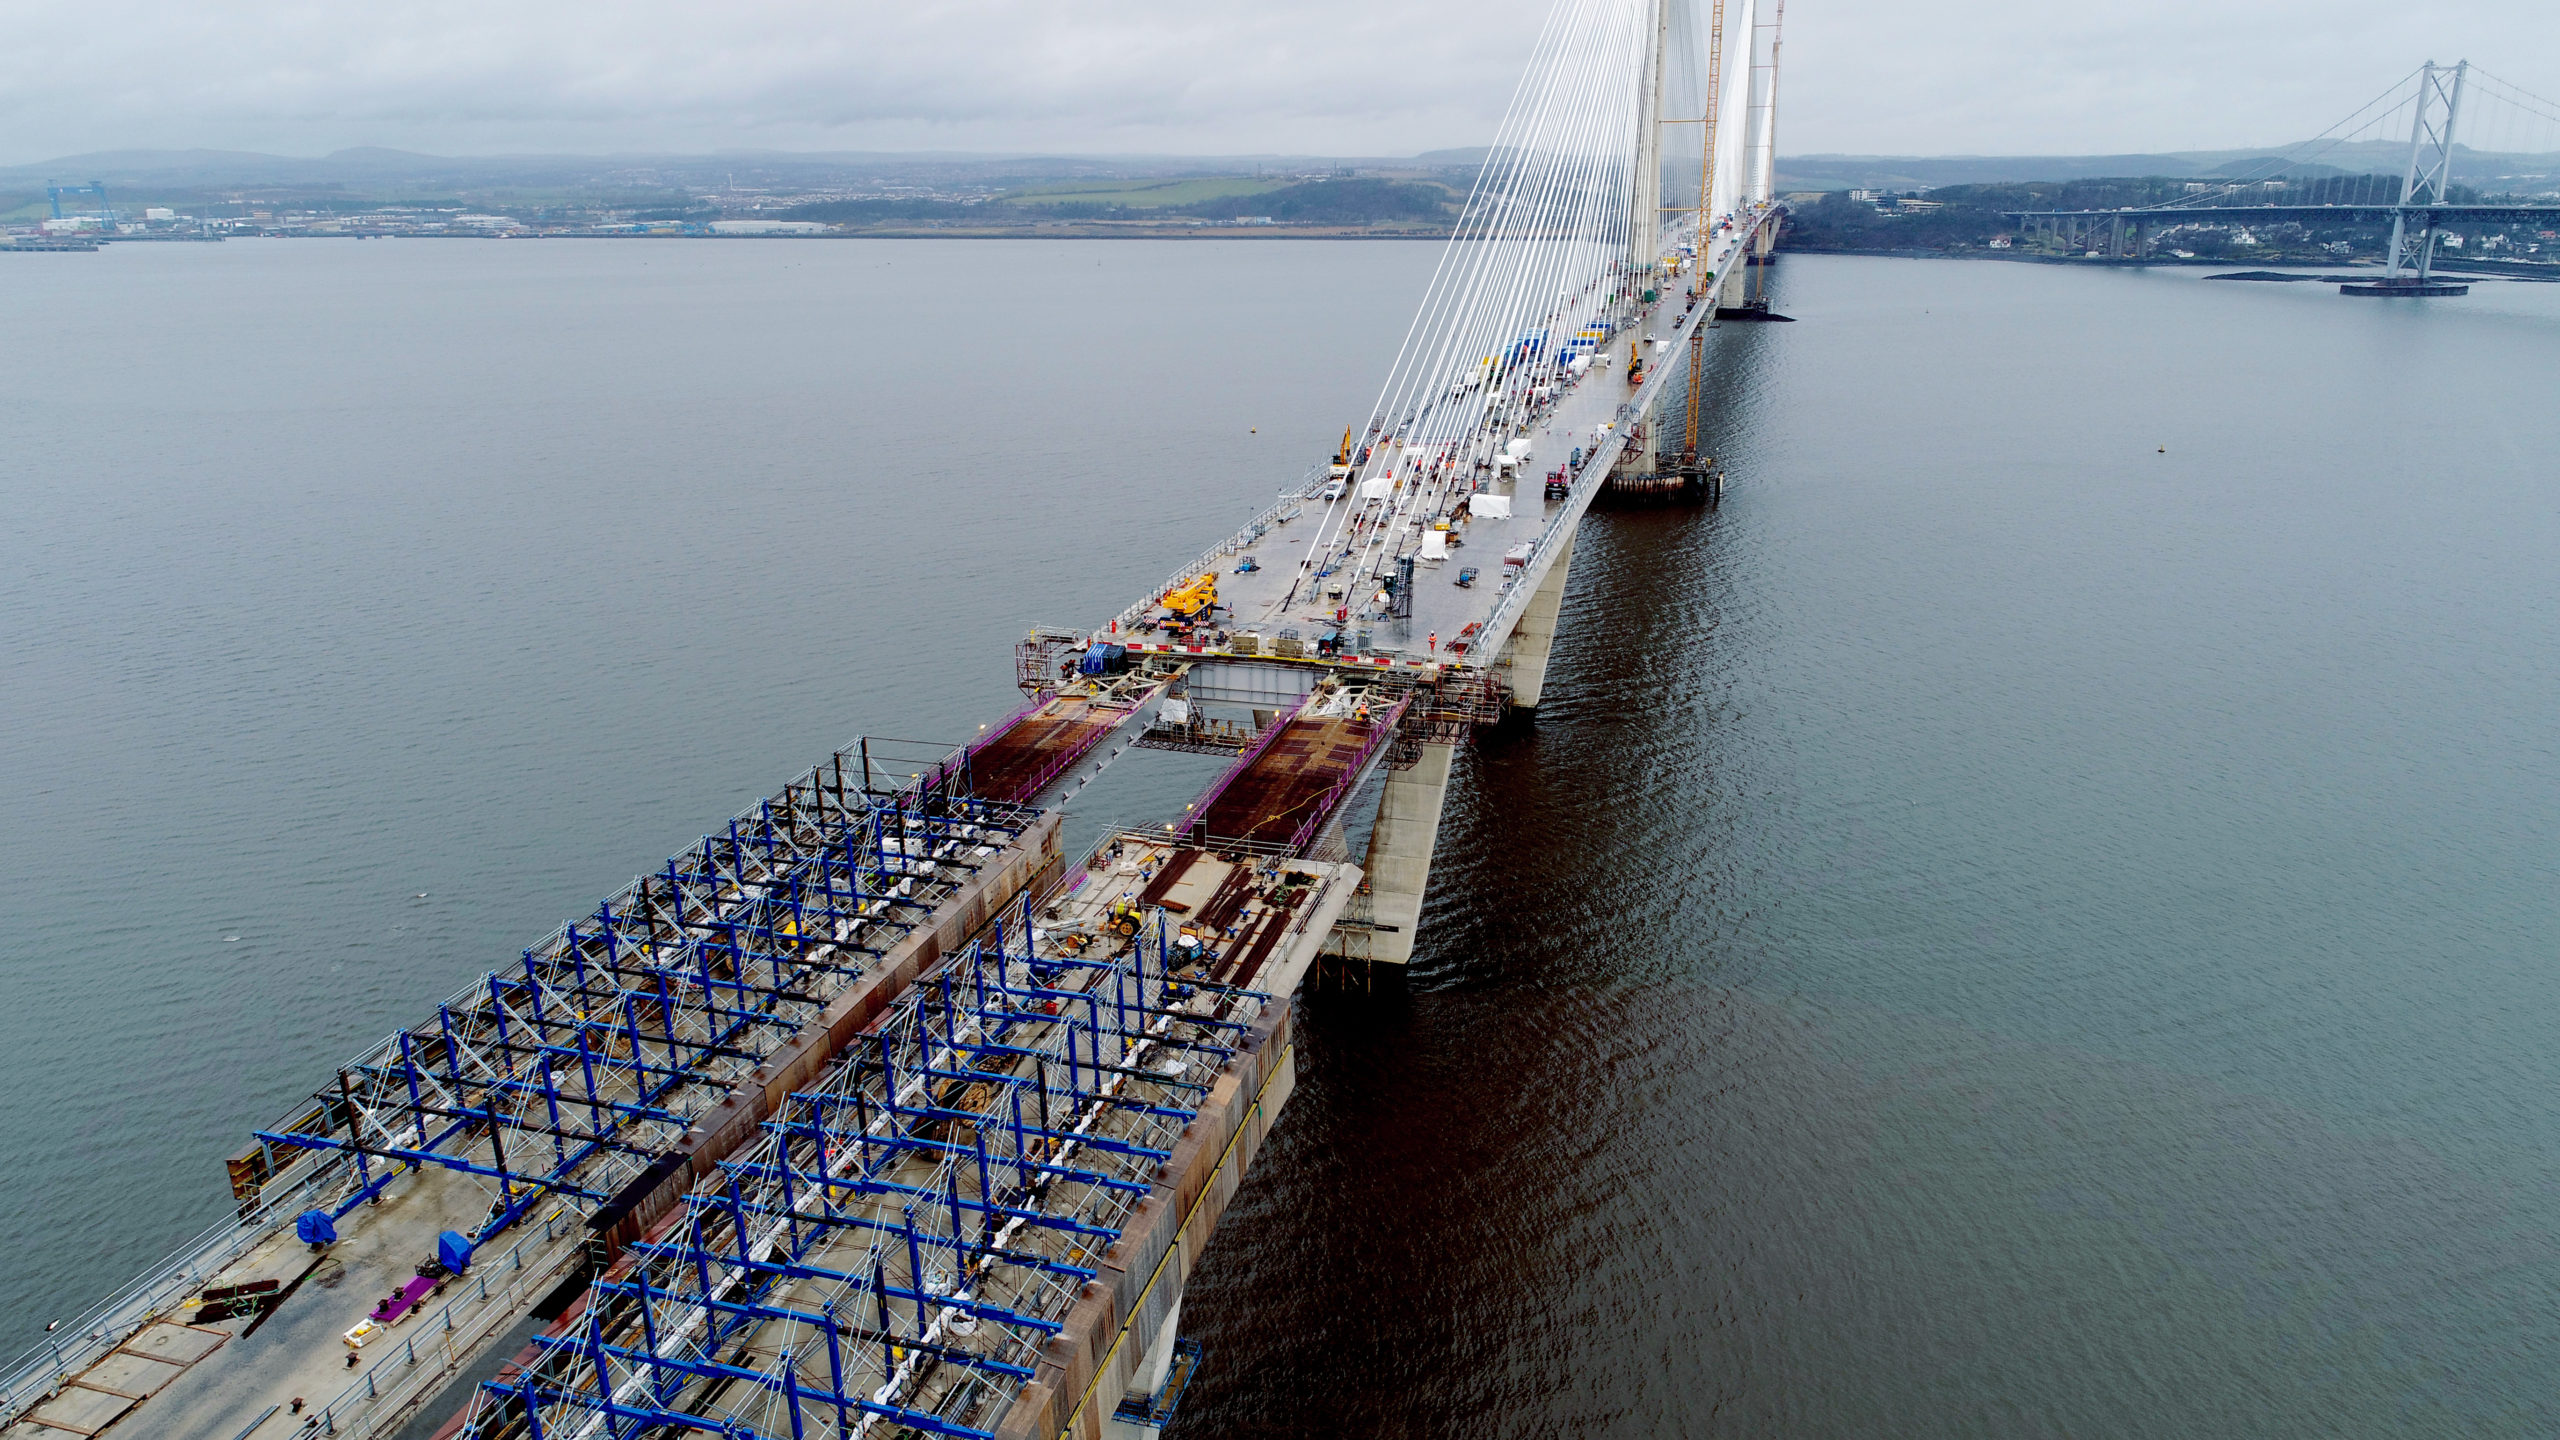 Bridges Construction case civil and structural engineering project queensferry crossing